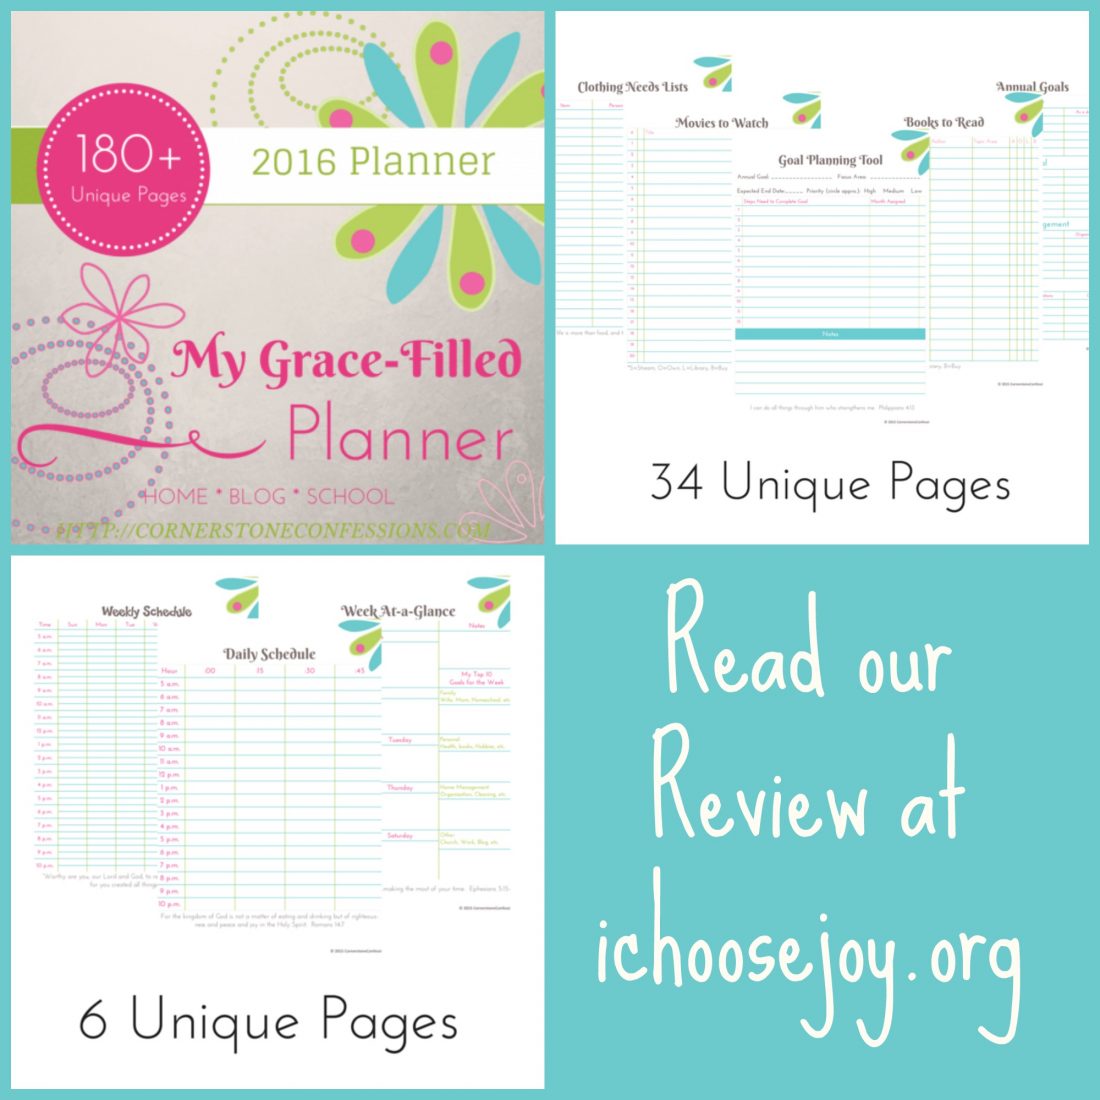 Highlight: My Grace-Filled Planner